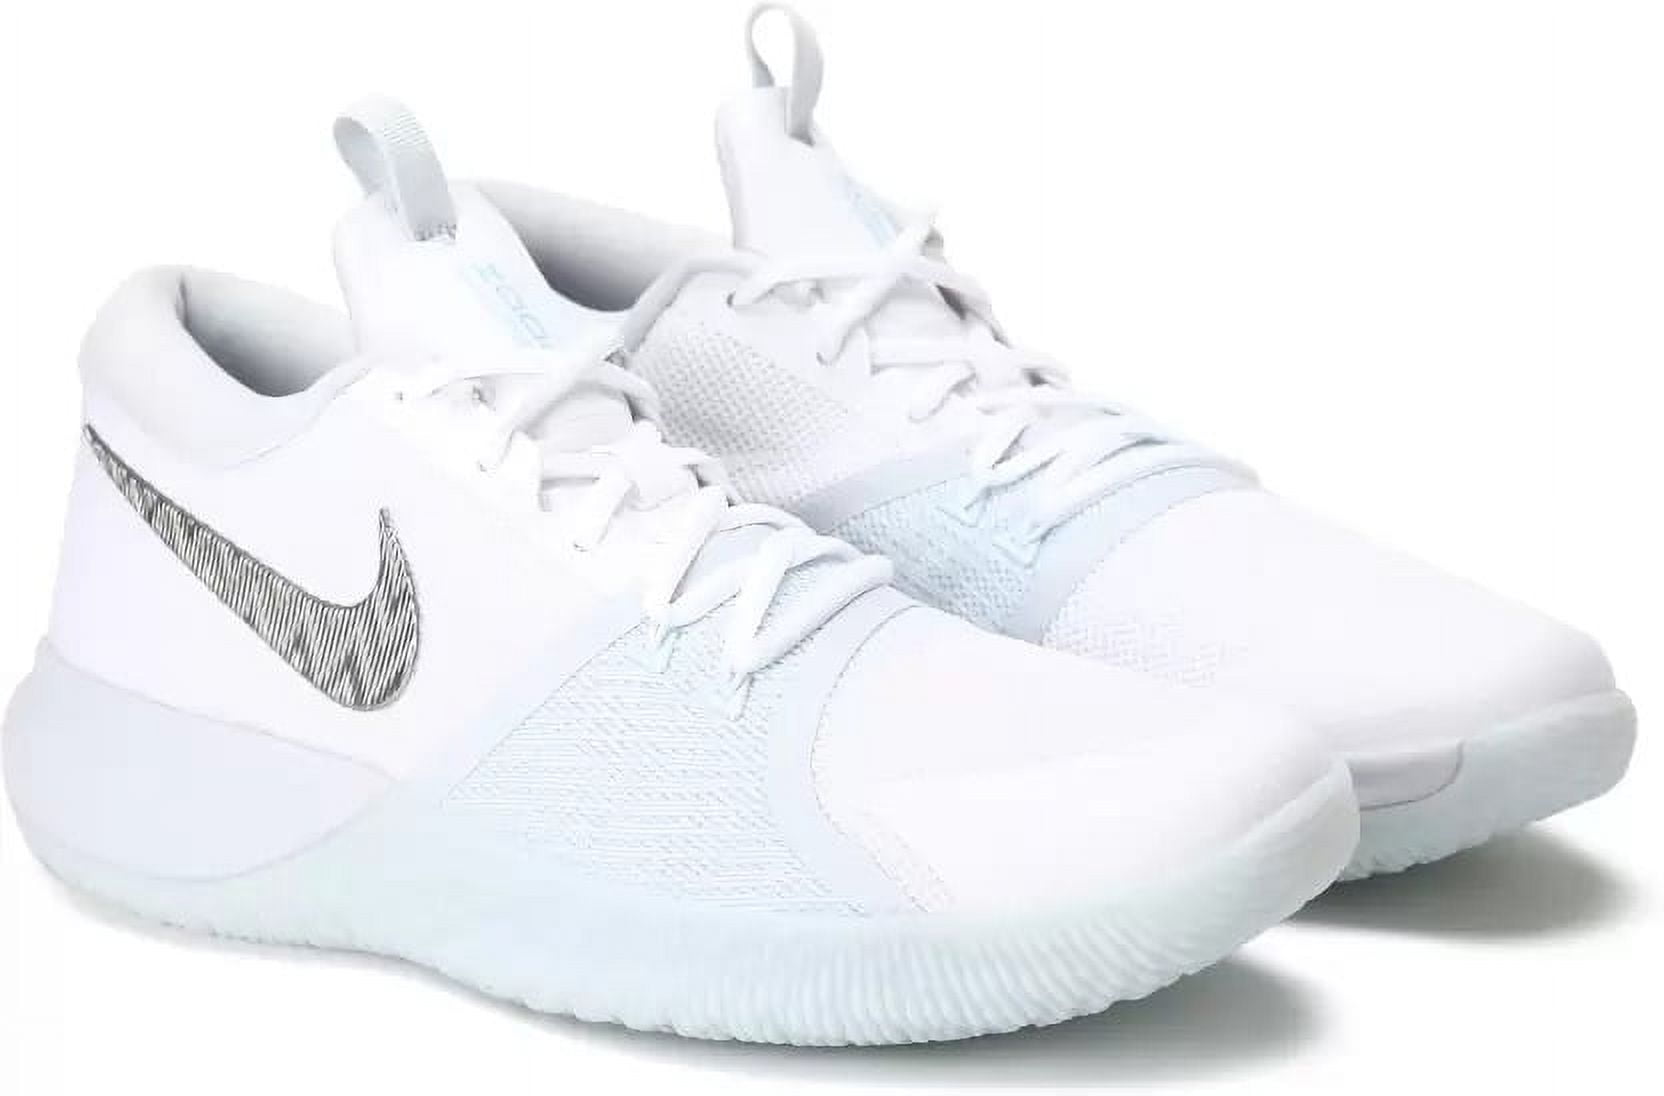 Nike Air Max 270 White Multi Size US Mens Athletic Running Shoes Sneakers |  eBay